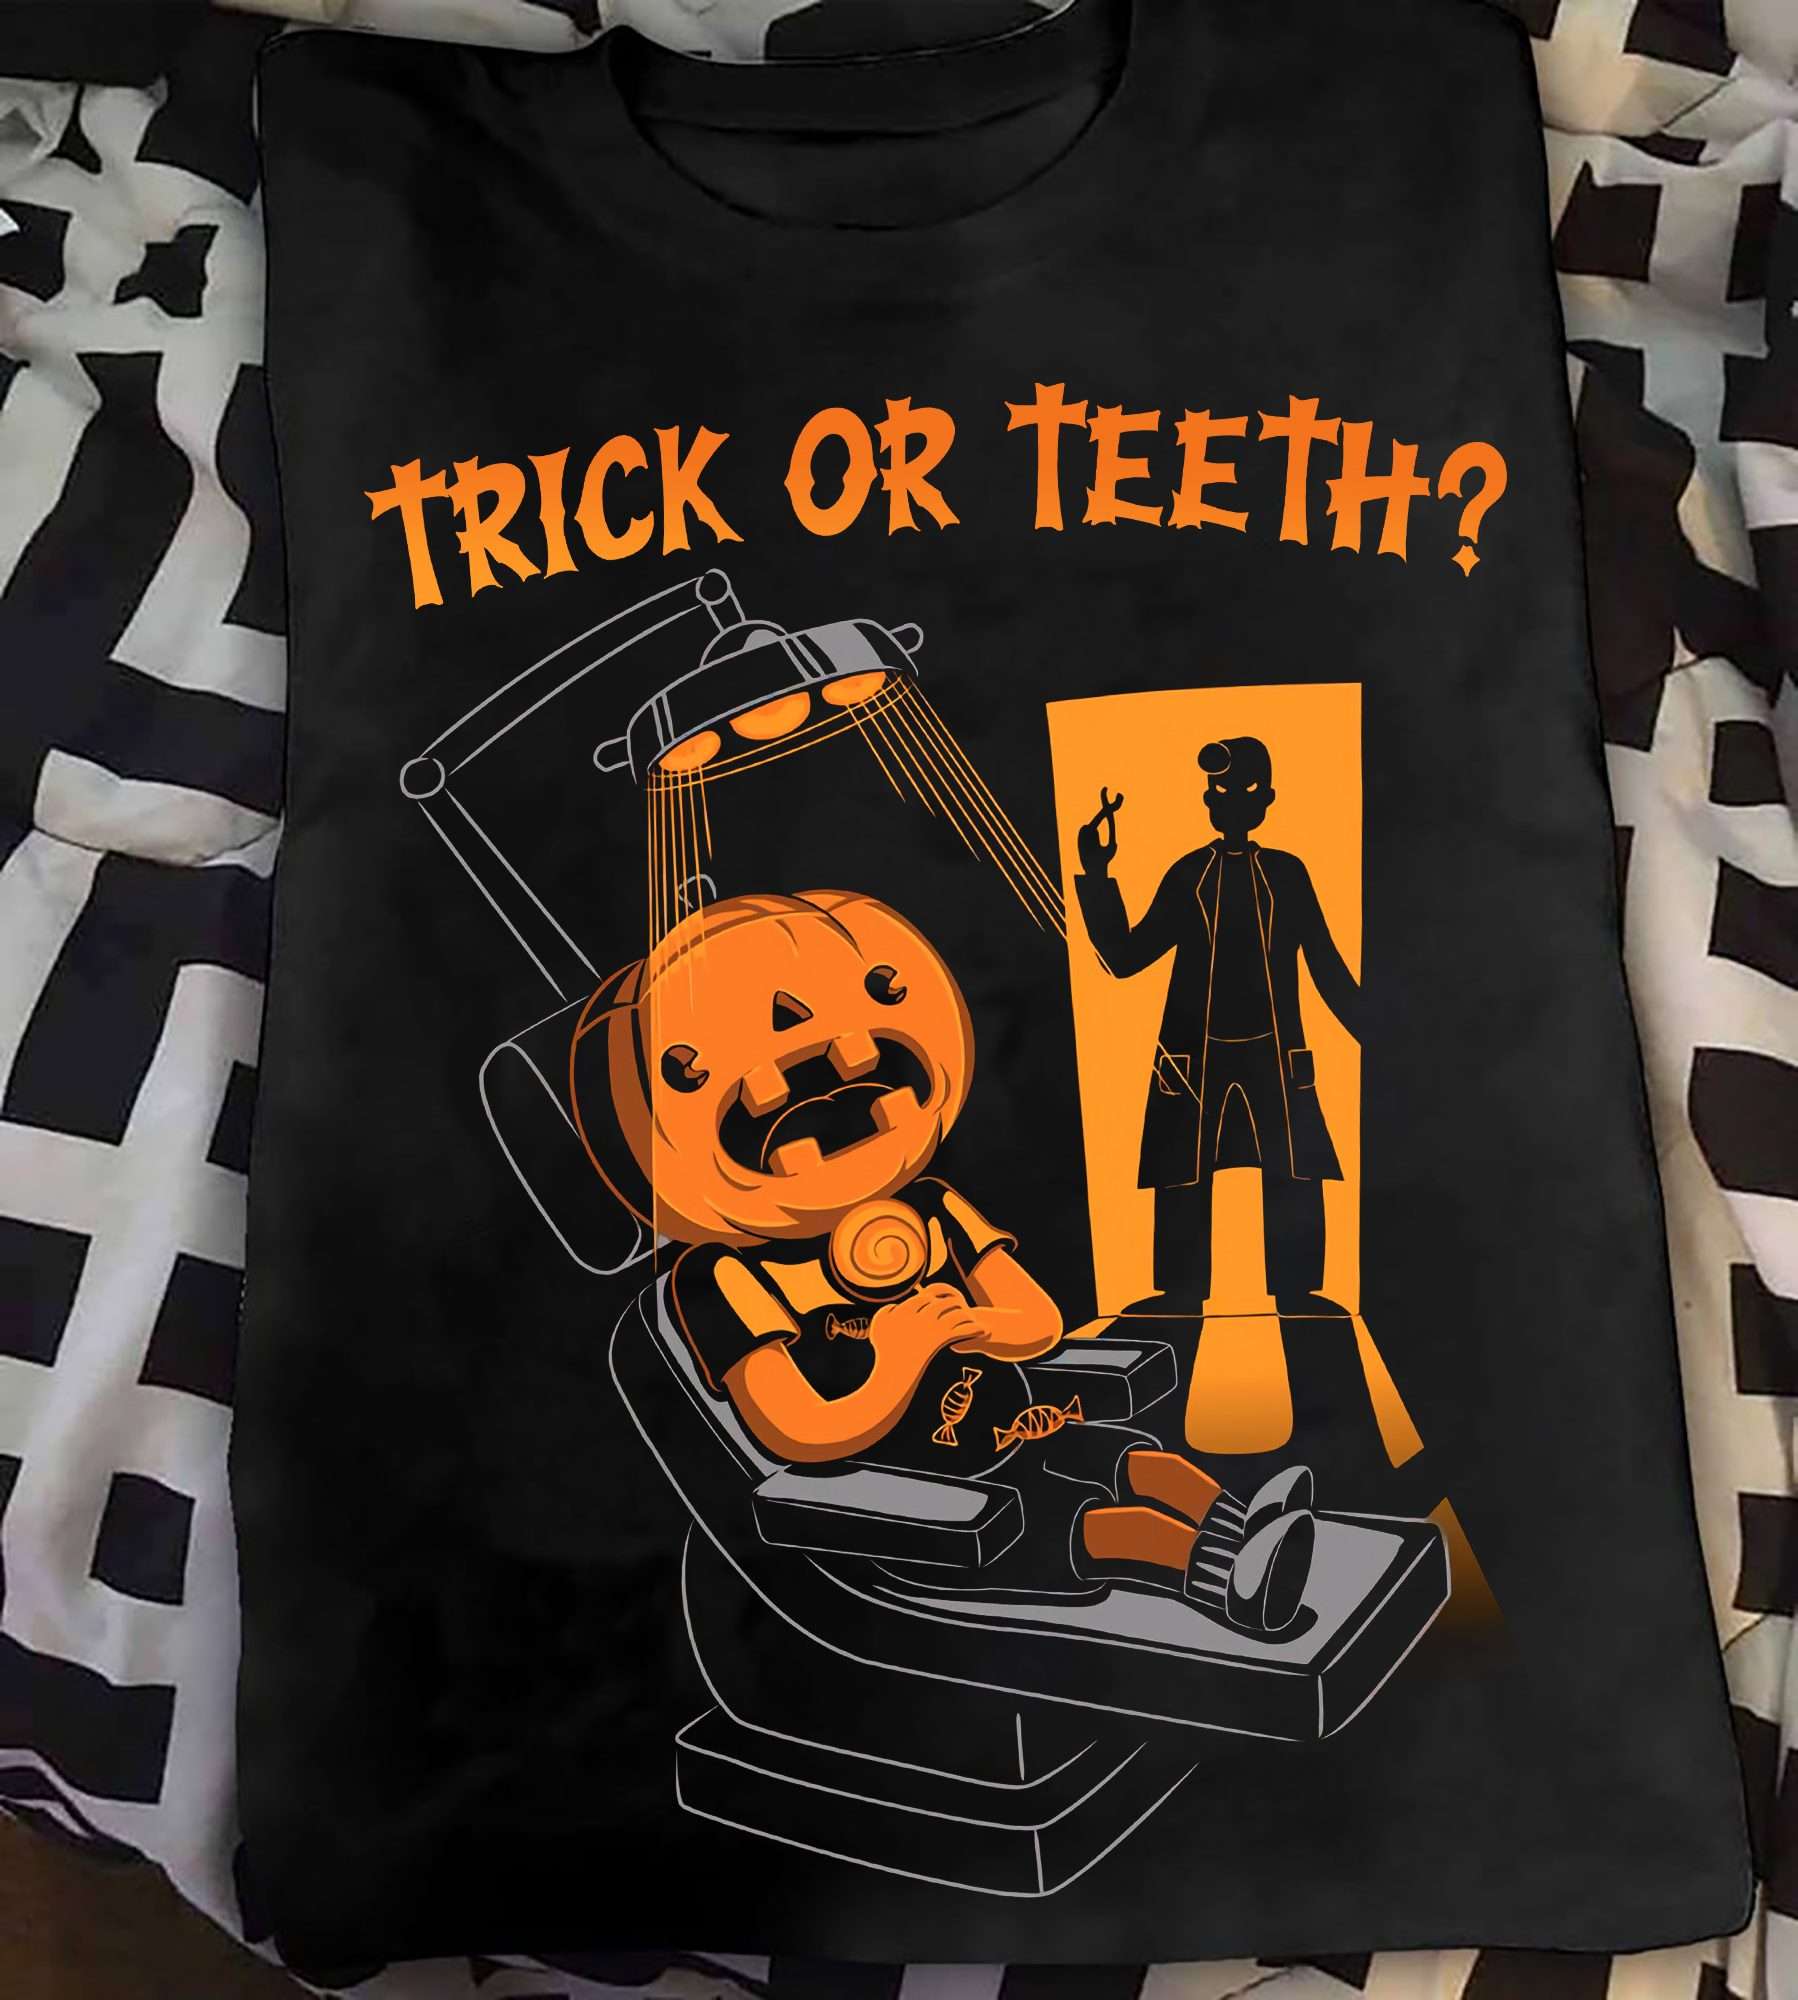 Trick or teeth - Halloween dentist scary shirt, trick or treat game